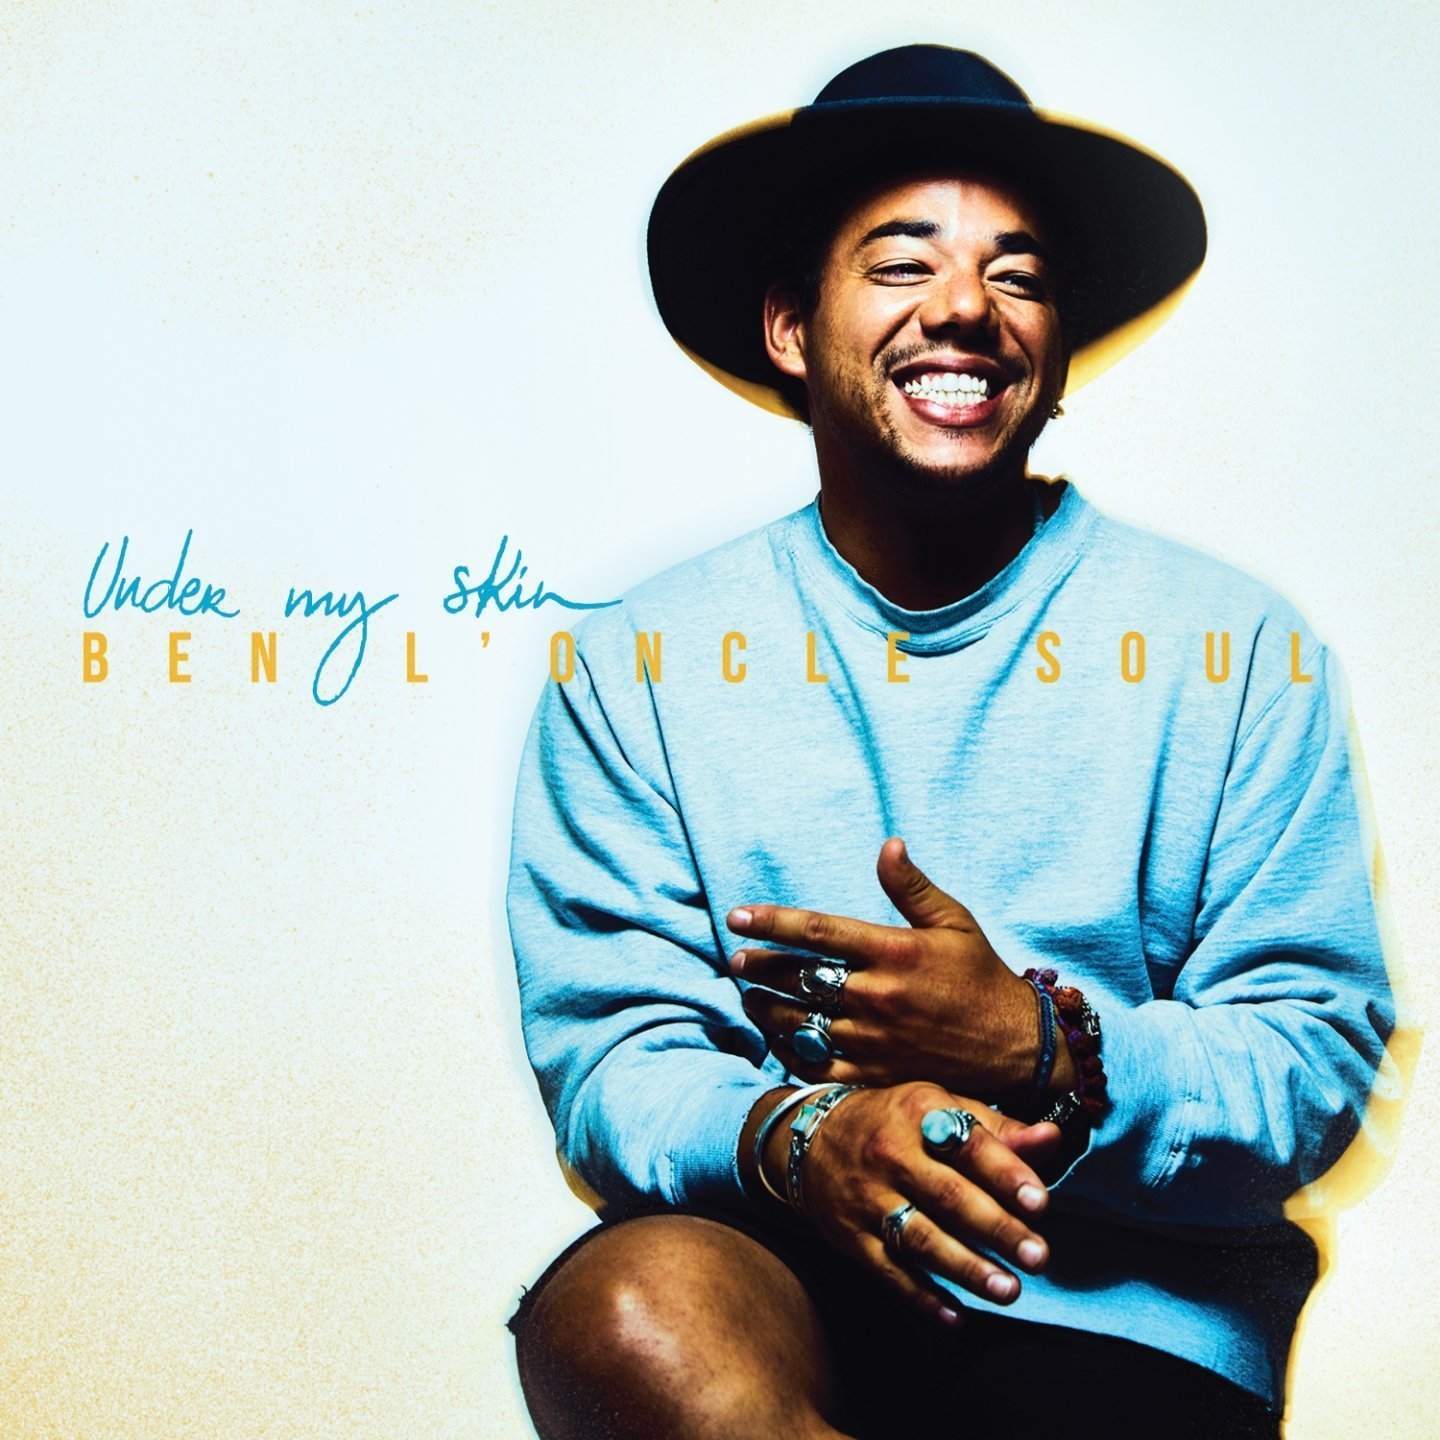 BEN I'ONCLE SOUL - Under My Skin cover 